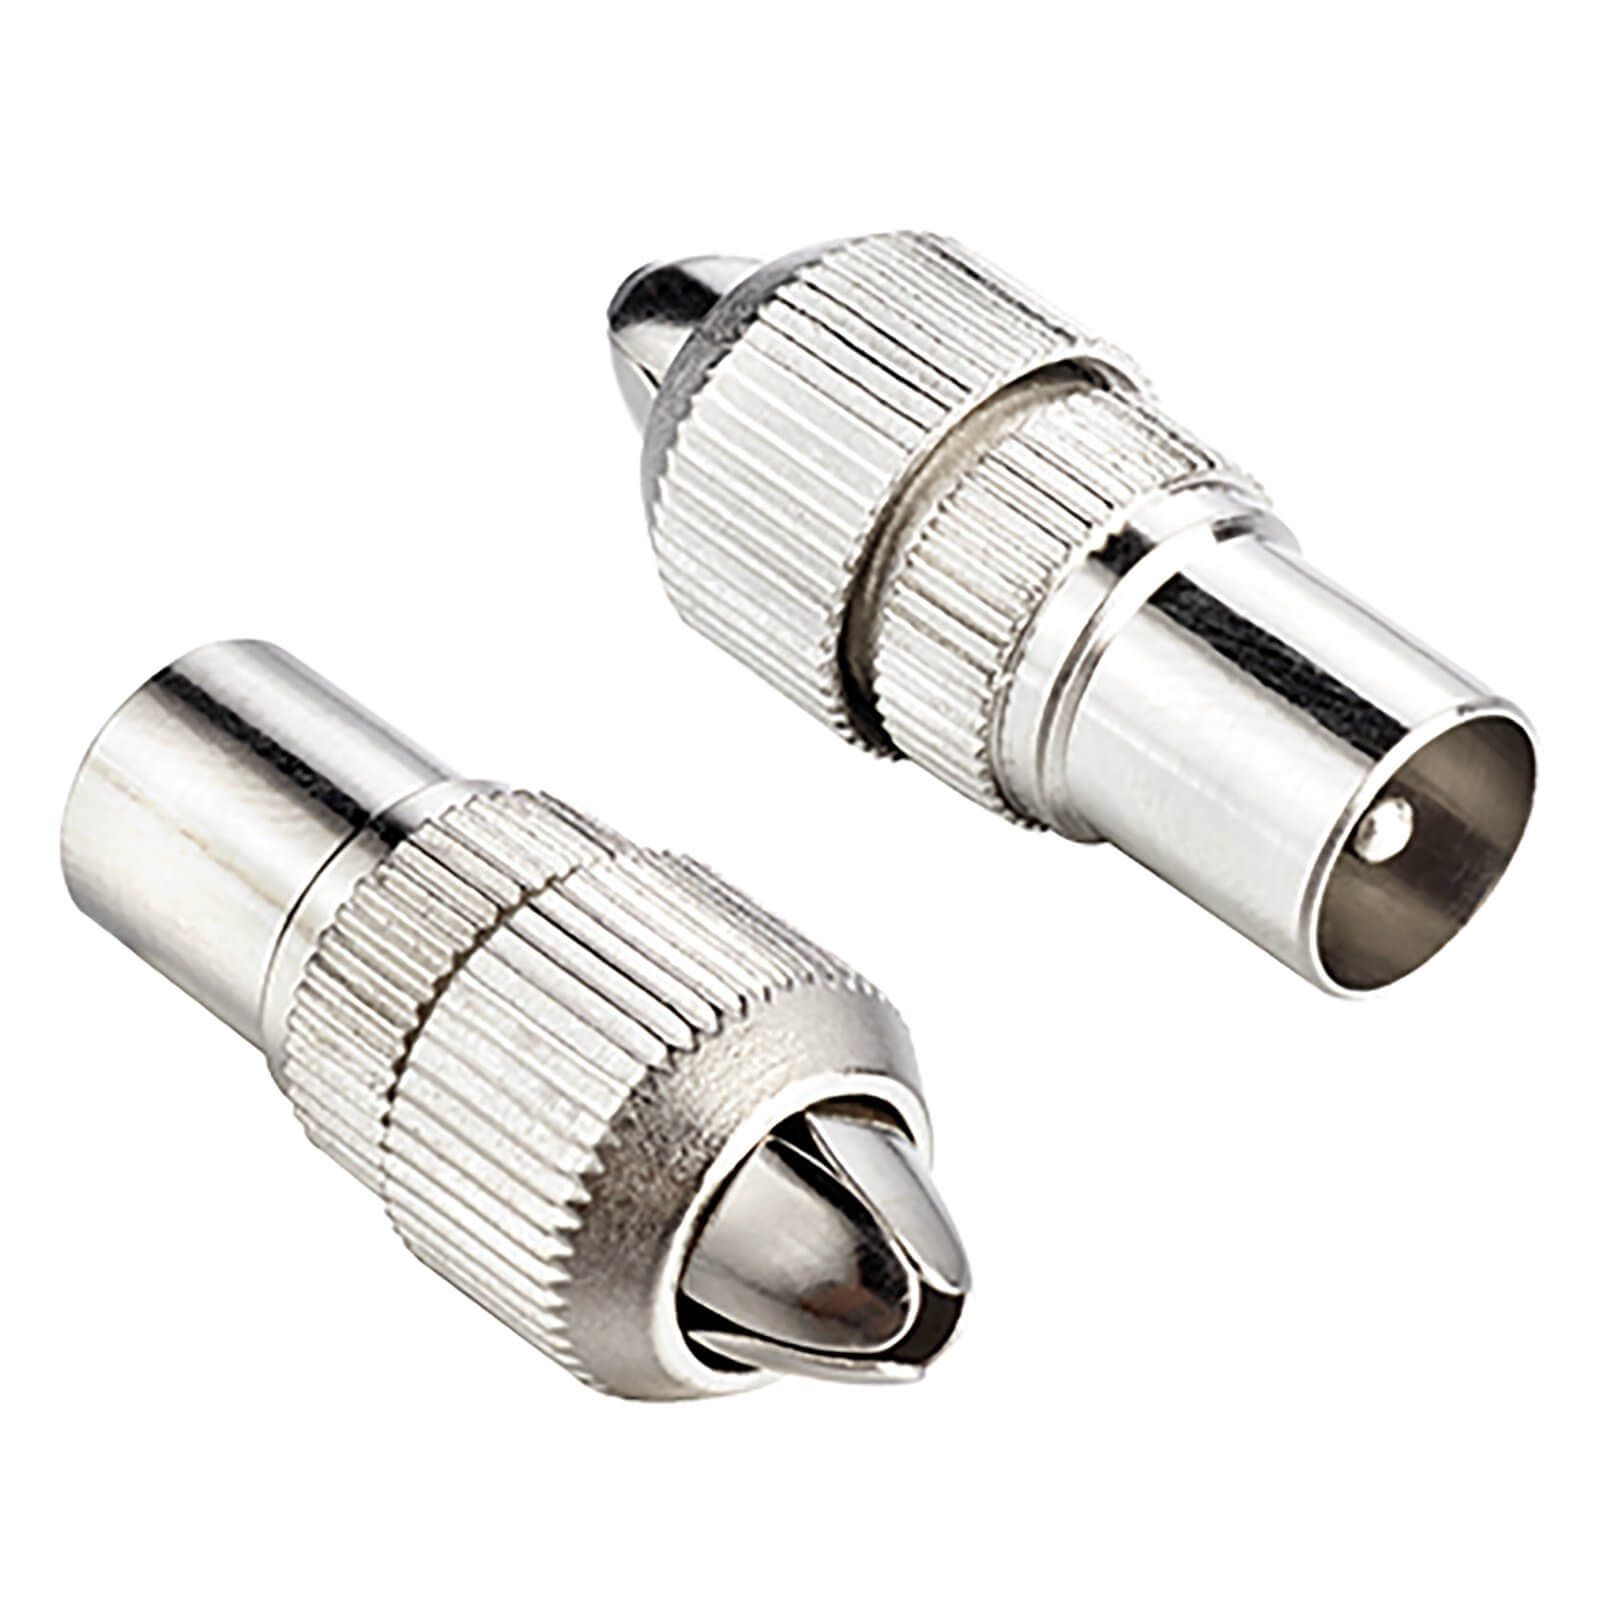 Photo of Ross Coaxial Aerial Cable Plugs Nickel 2 Pack